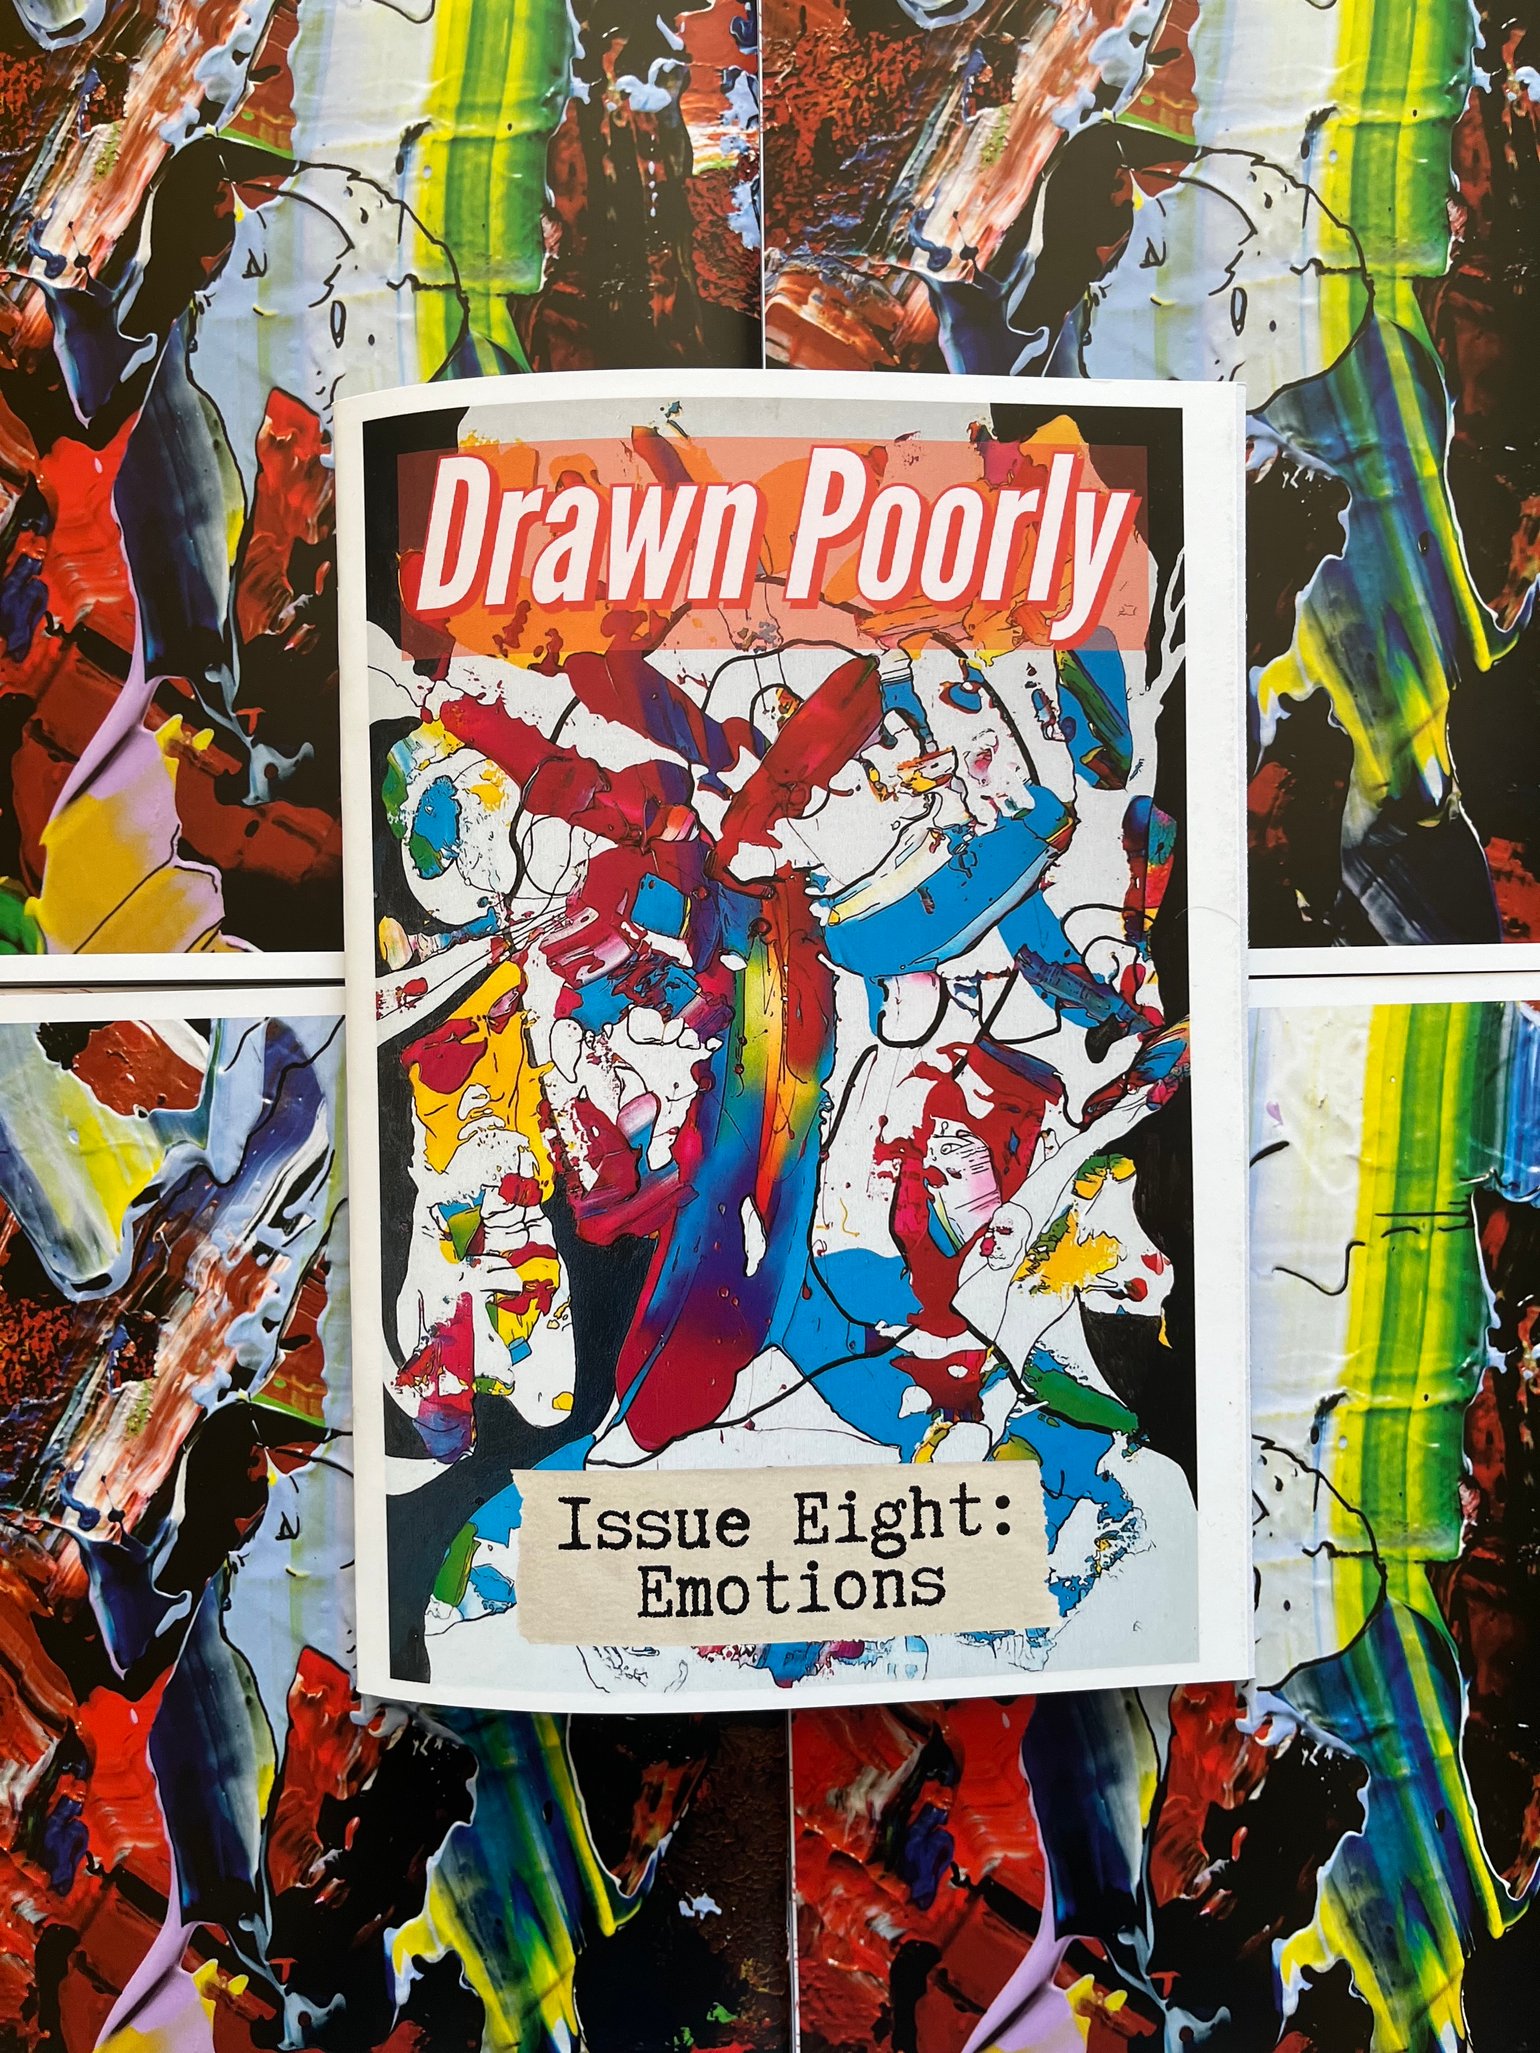 Image of Drawn Poorly: Issue Eight Emotions 